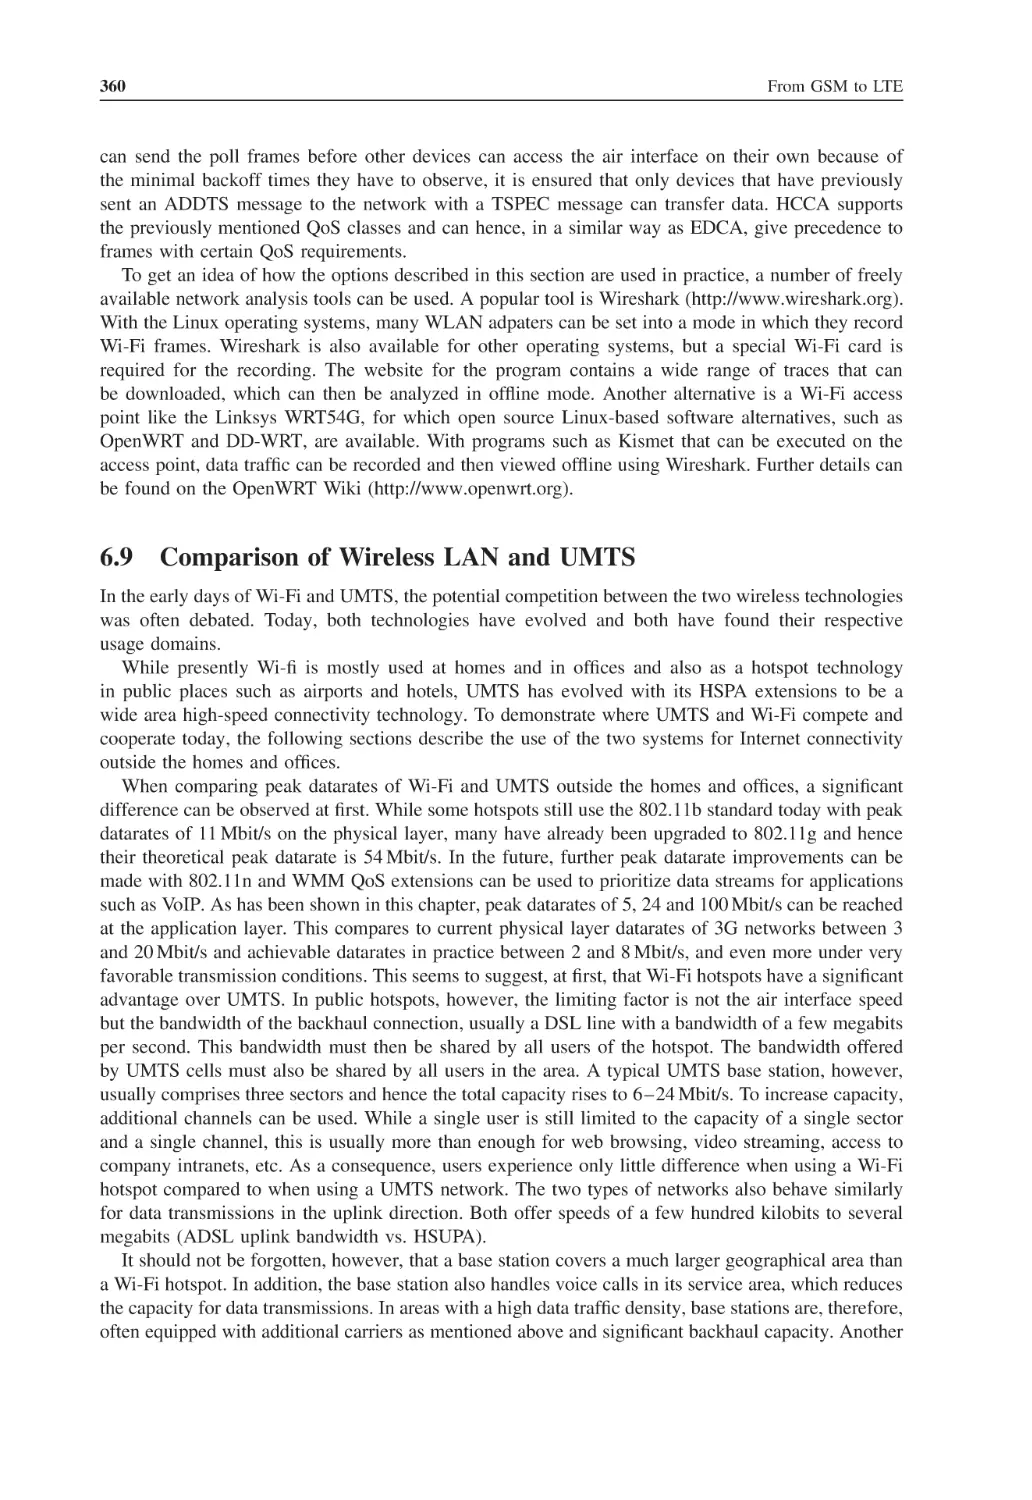 6.9 Comparison of Wireless LAN and UMTS